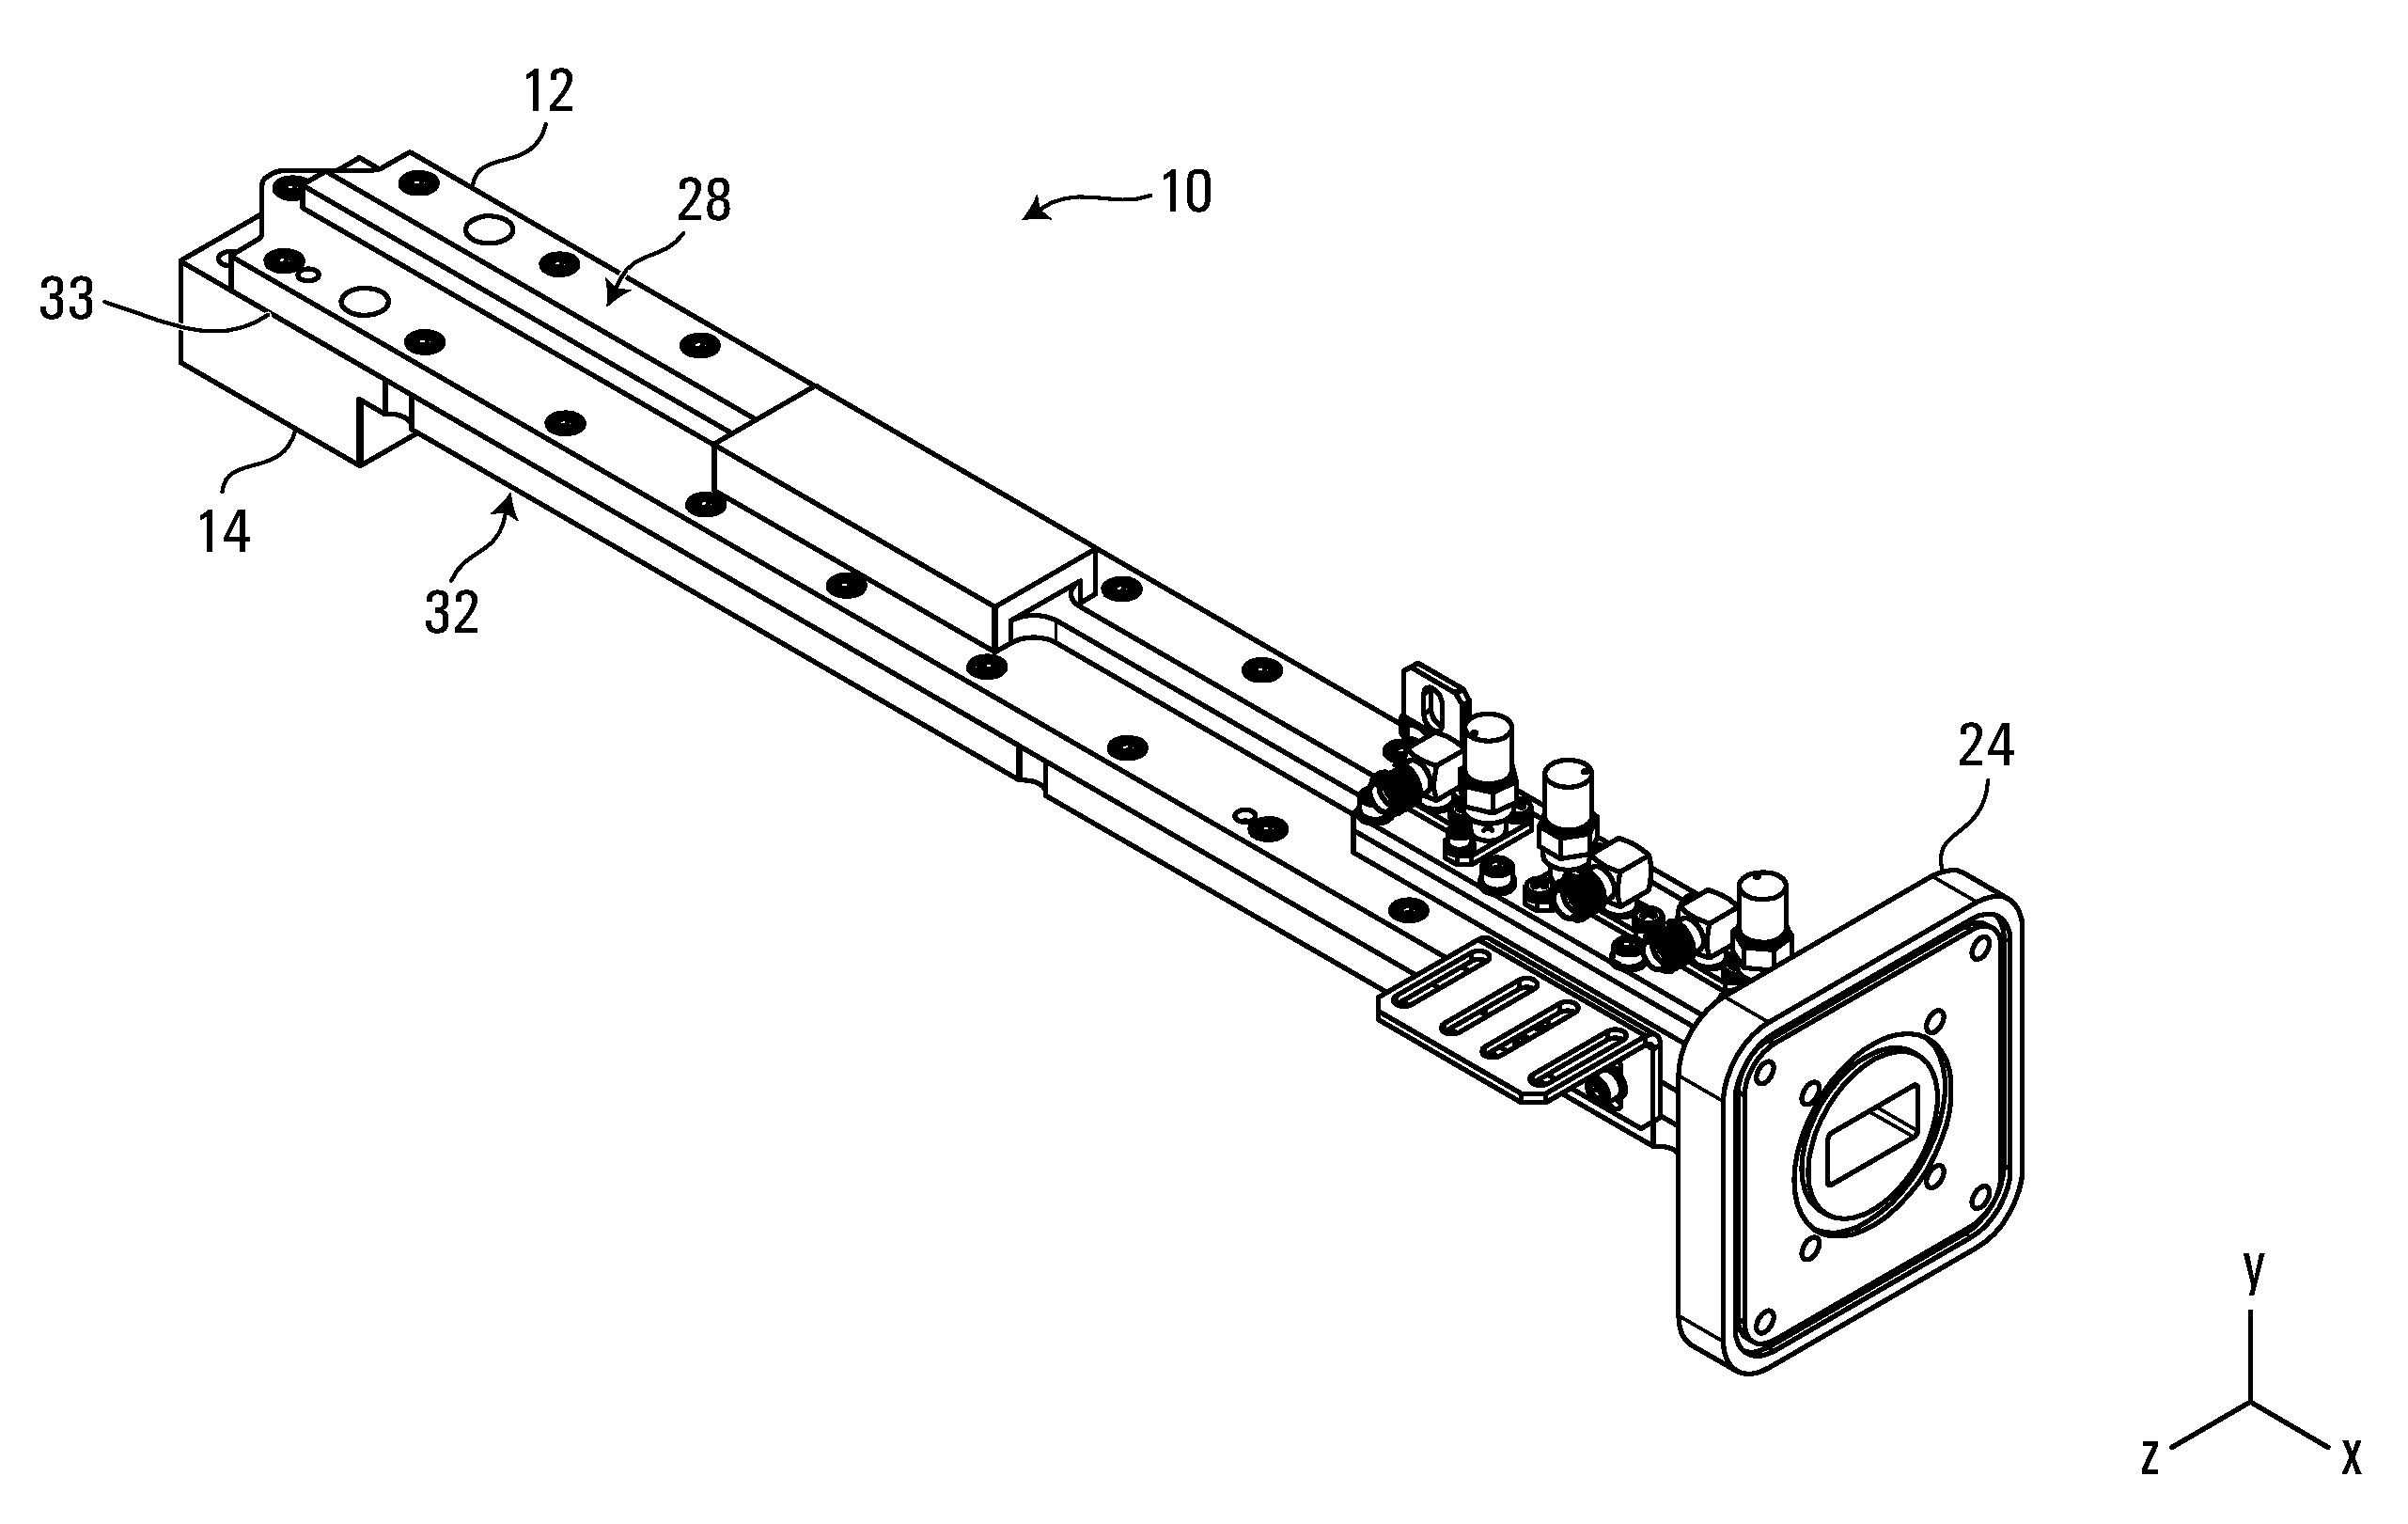 Multi-component waveguide assembly